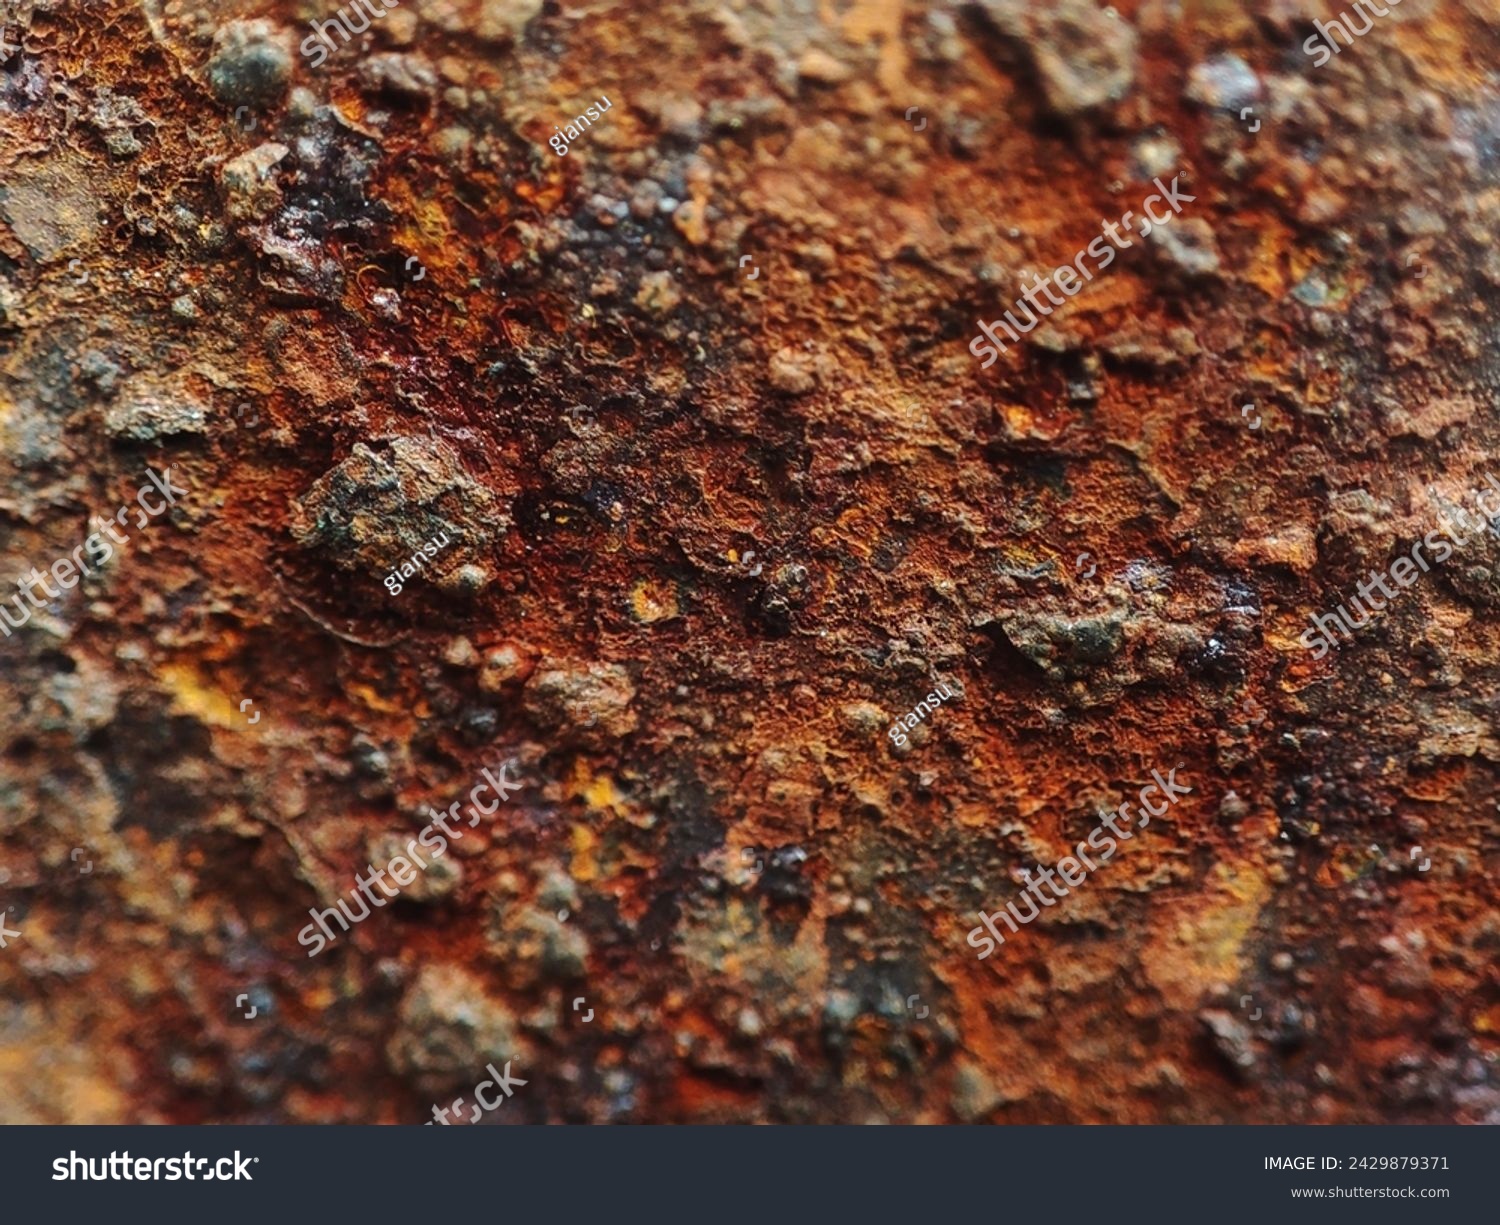 Rust of metals.Corrosive Rust on old iron.Rusty metal background with streaks of rust. Old shabby paint.metal rust texture background. #2429879371